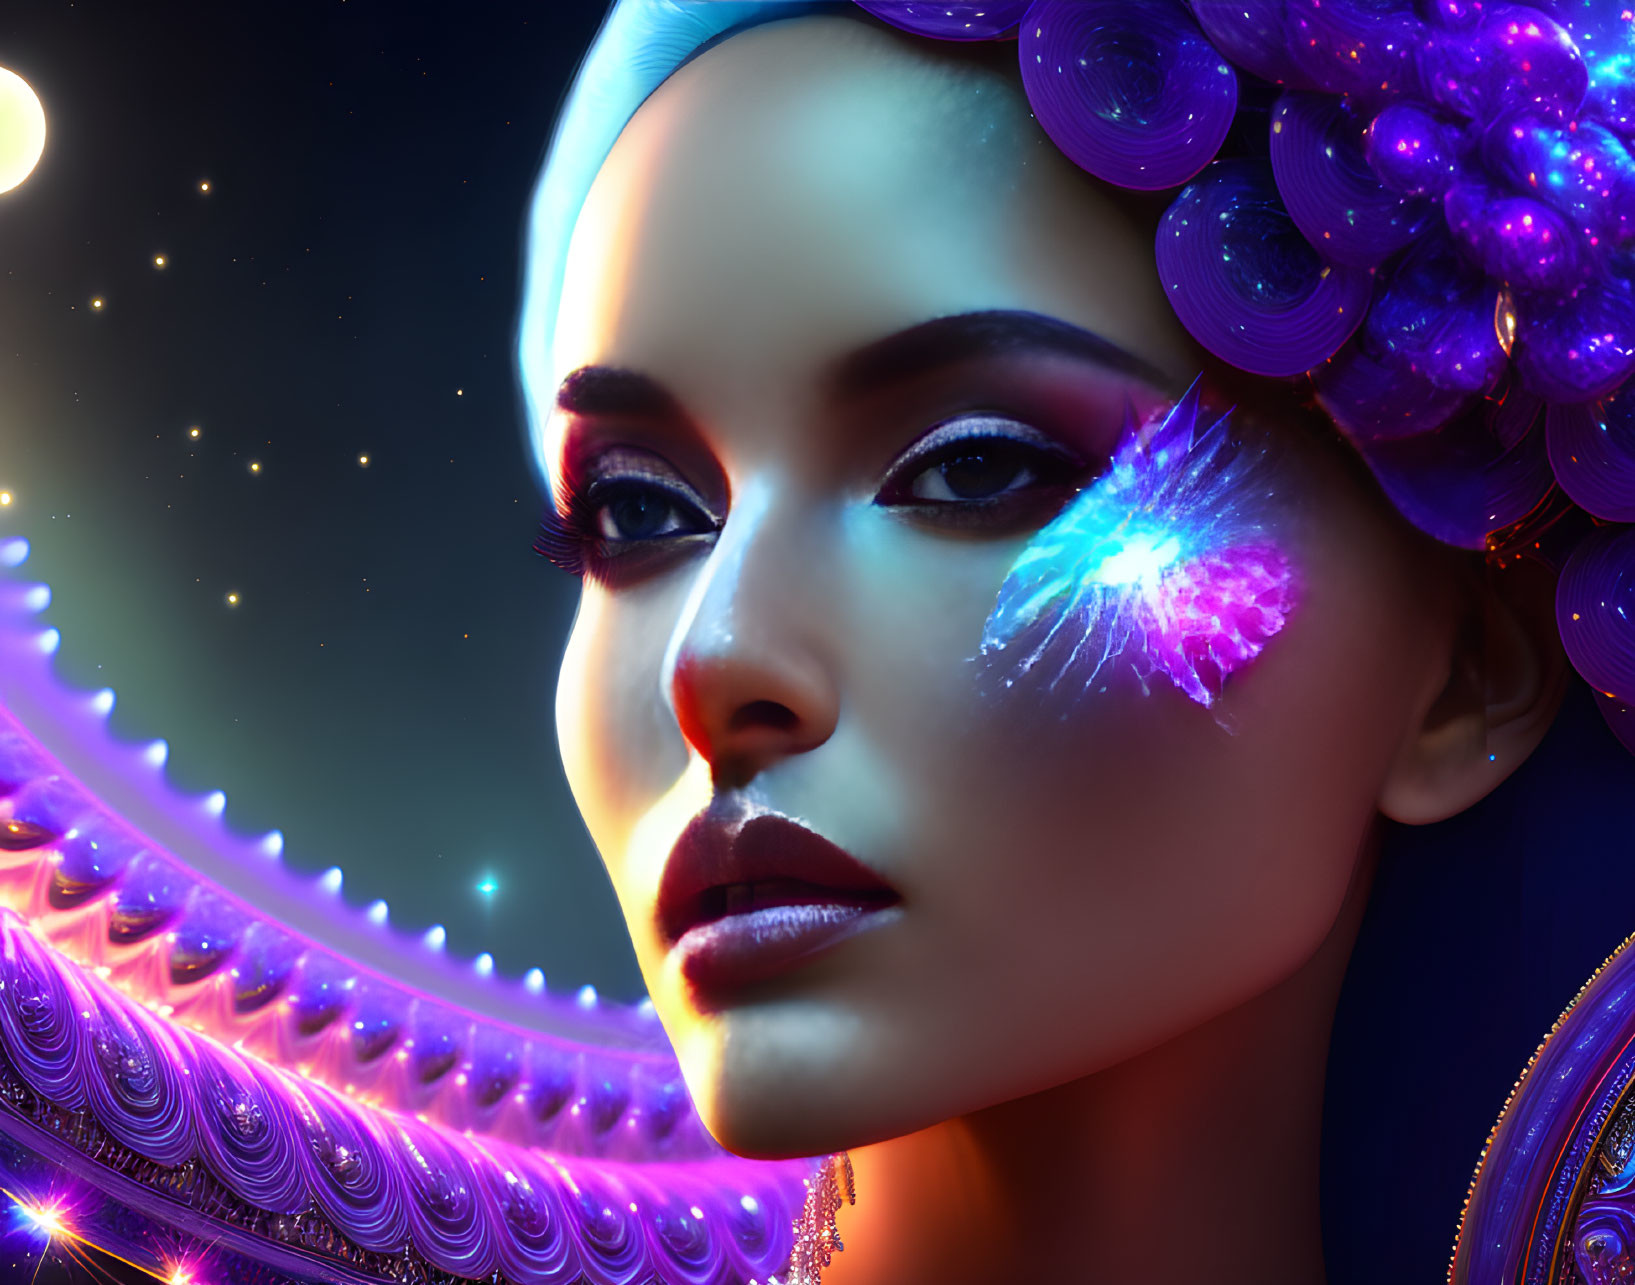 Futuristic digital artwork of woman with glowing makeup and cosmic backdrop